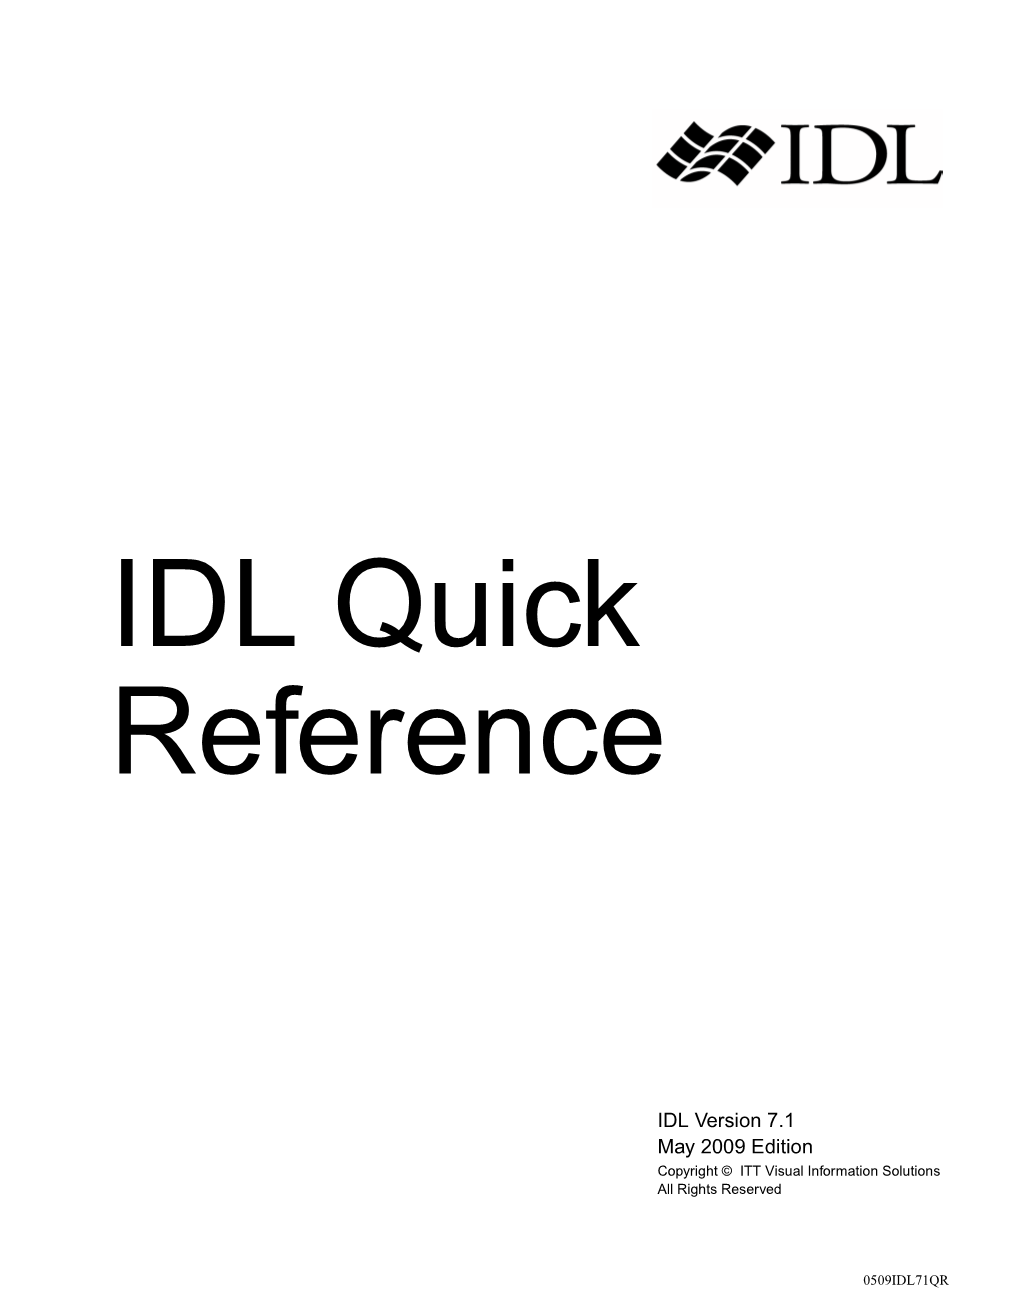 IDL Quick Reference